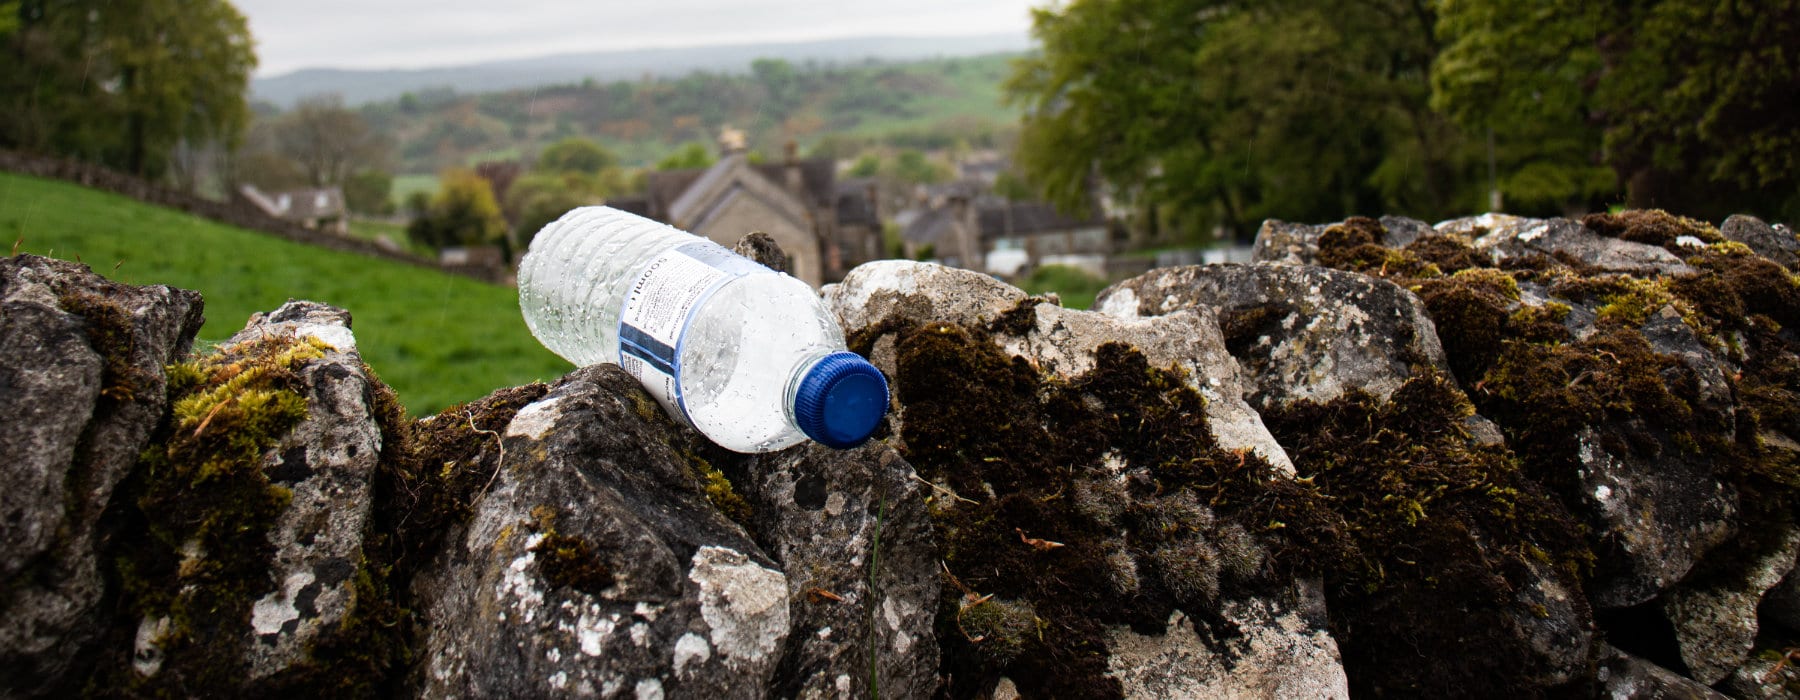 Plastic bottle on wall in countryside